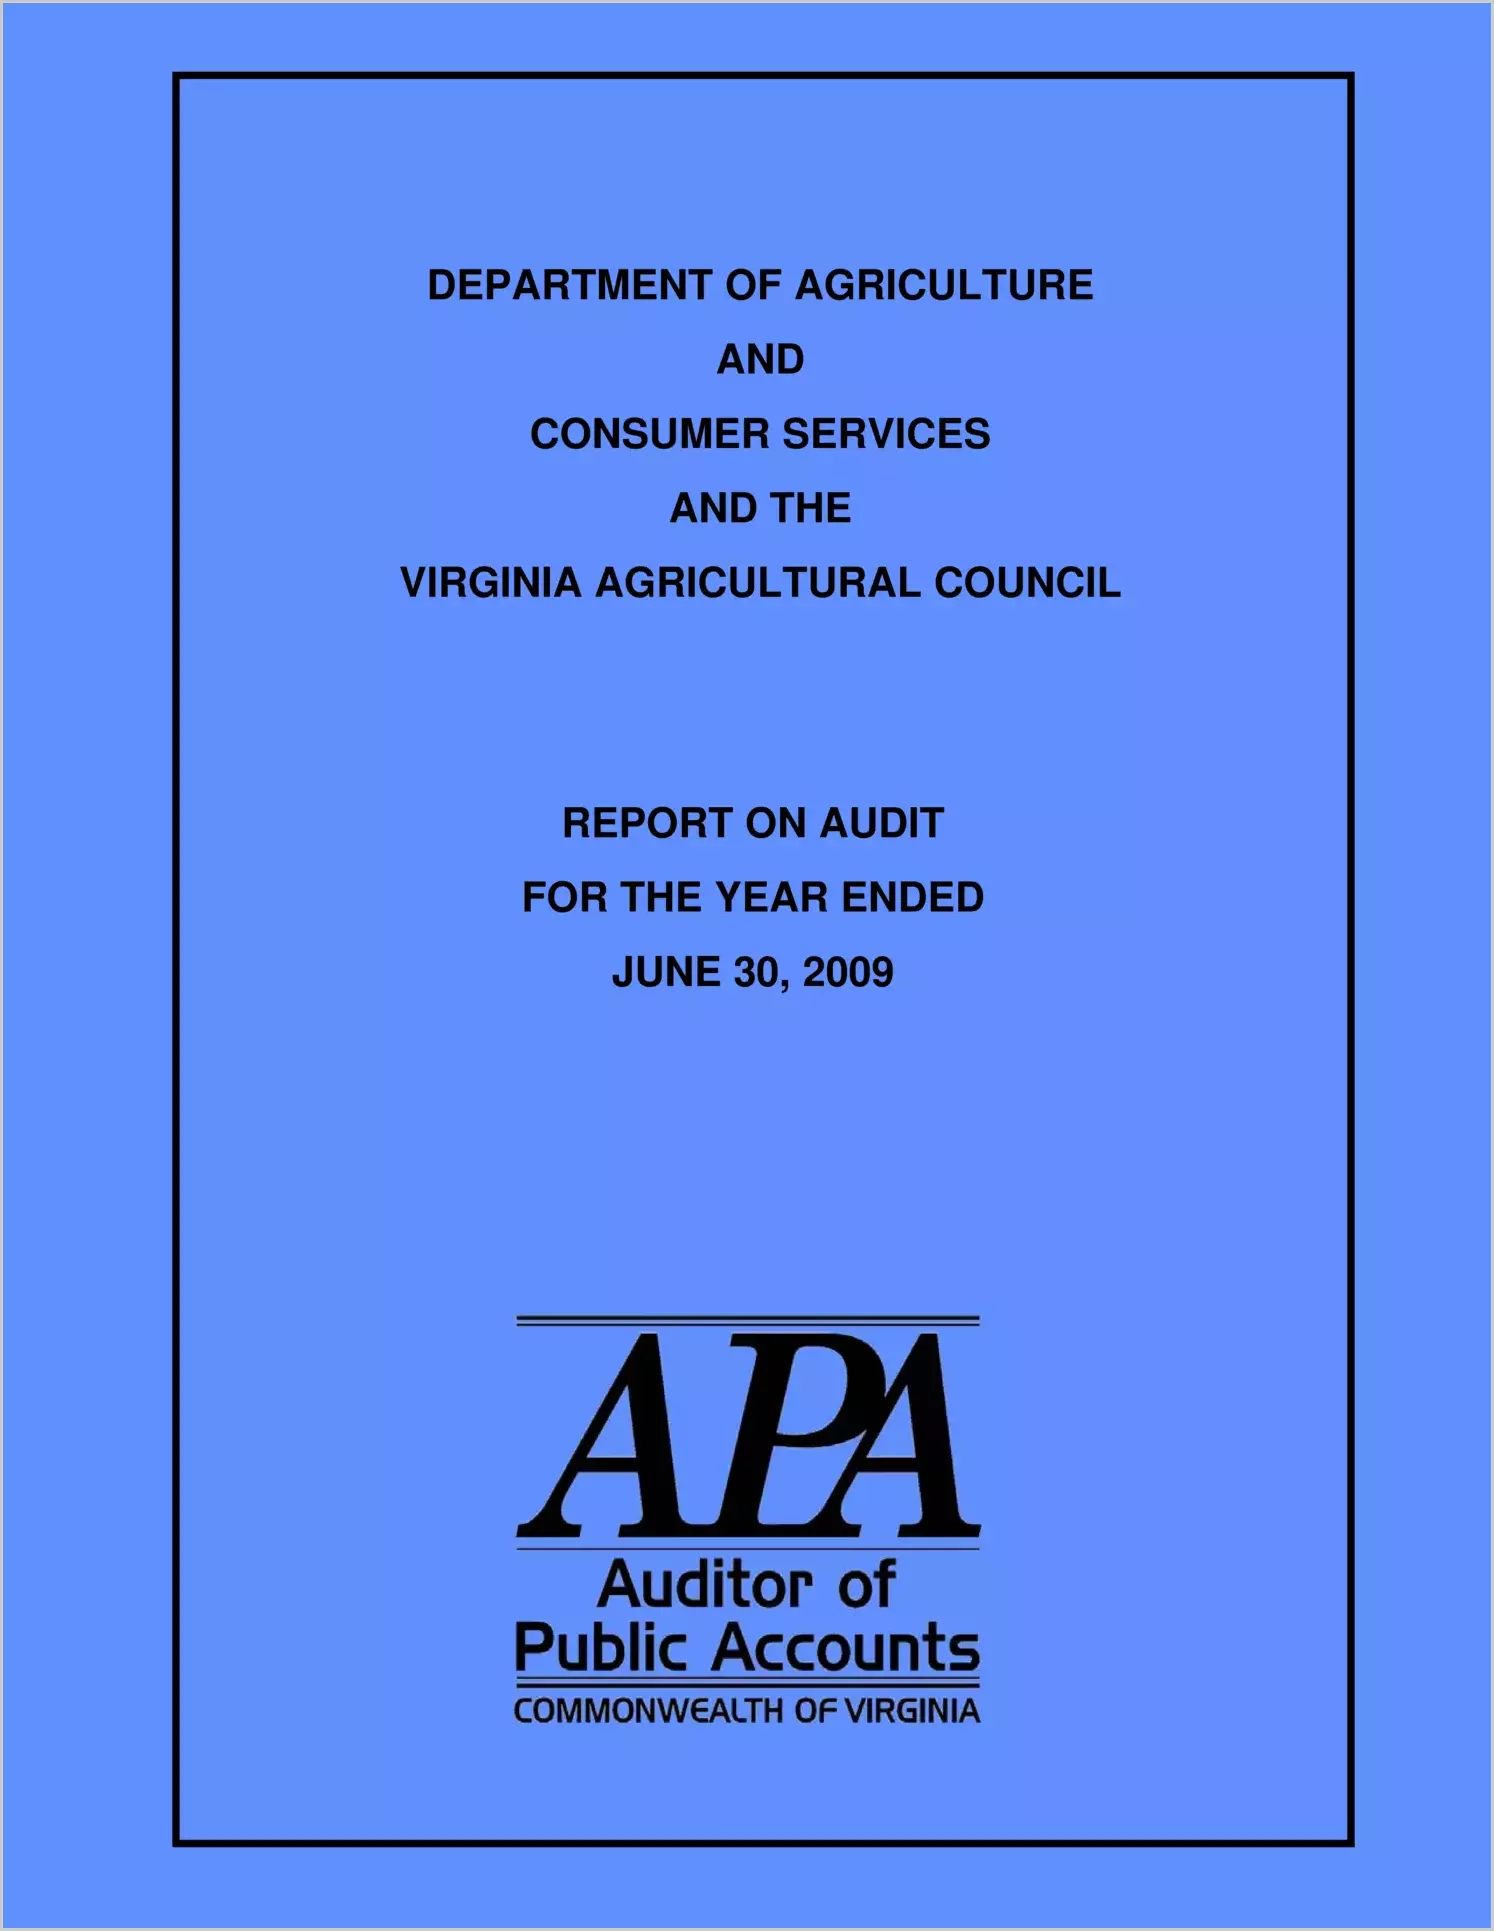 Virginia Department of Agriculture and Consumer Services and the Virginia Agricultural Council for the year ended June 30, 2009